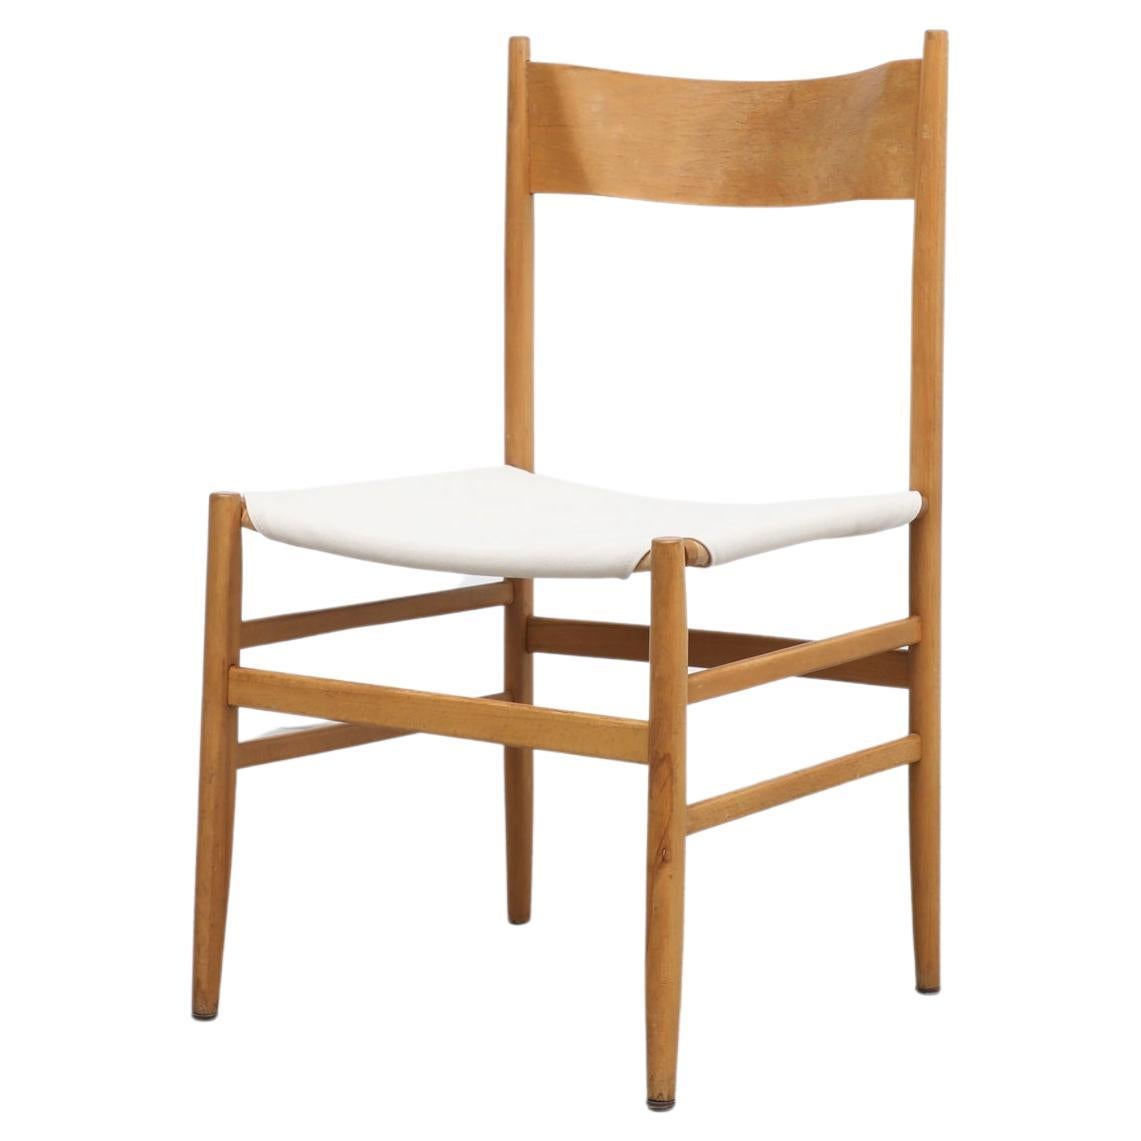 Hans Wegner Inspired Danish Blonde Dining Chairs with New White Canvas Seats